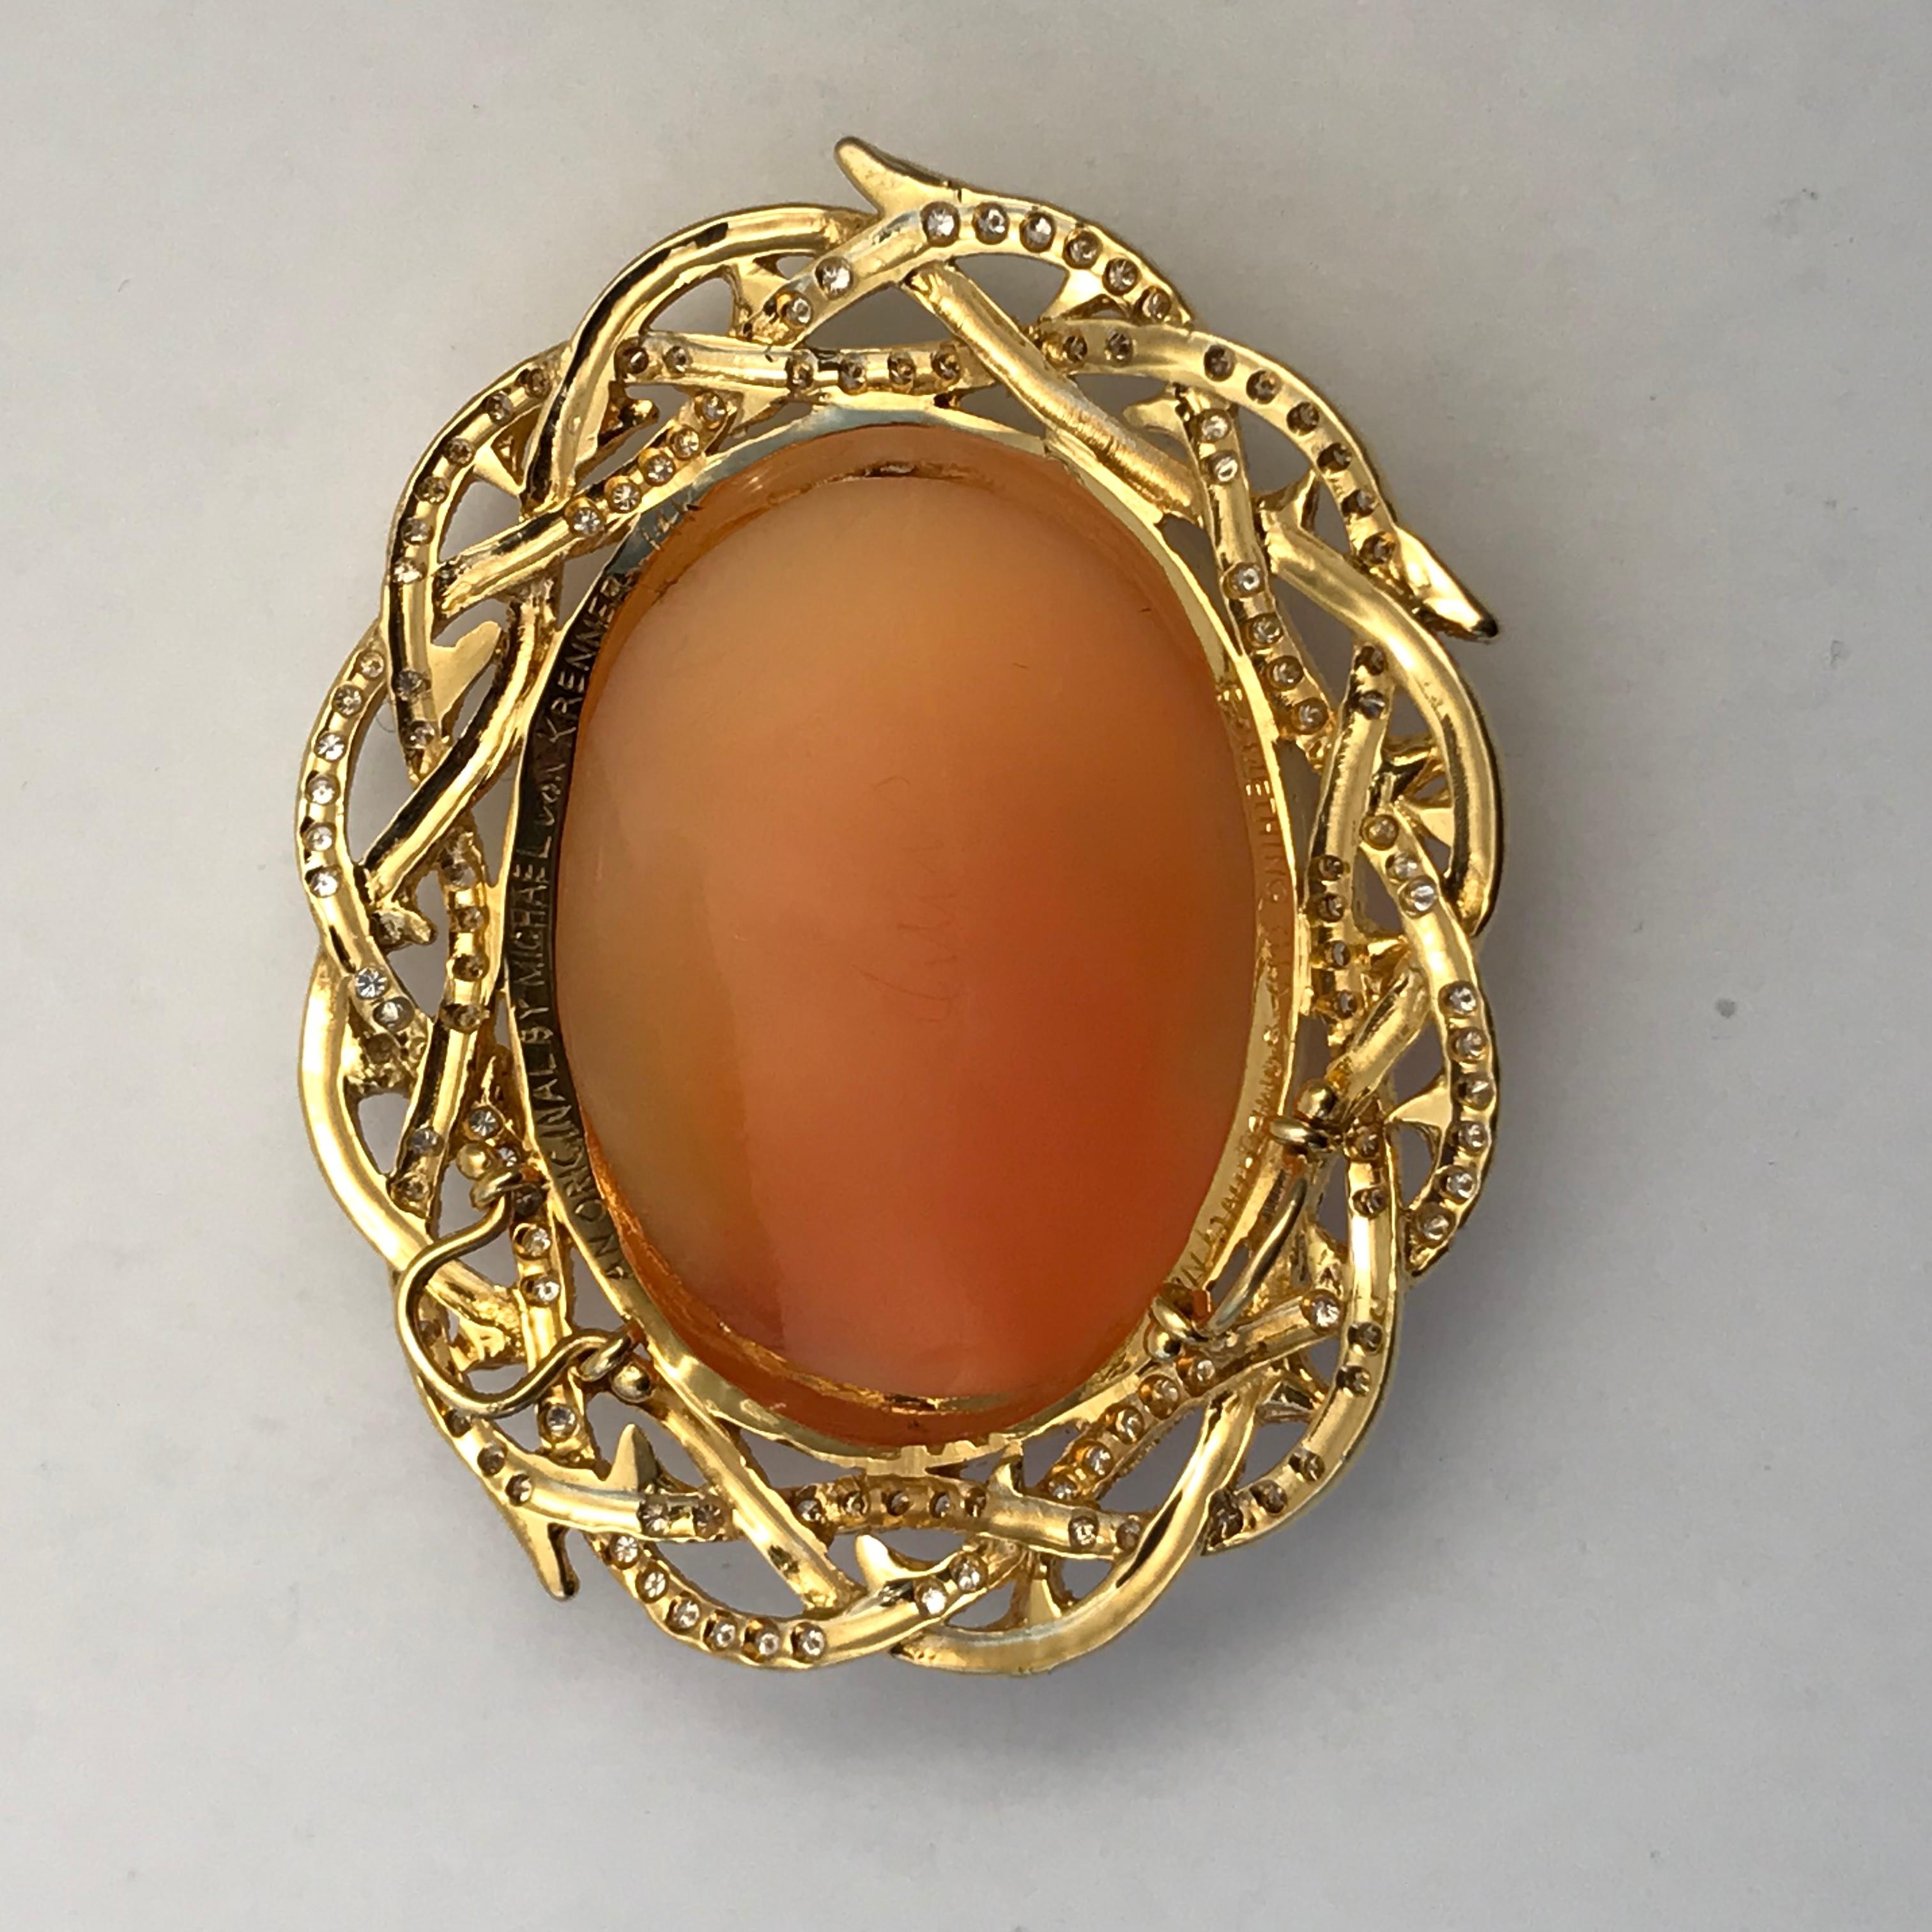 Cameo 1890s Jesus Set in 14 Karat Gold with Diamonds, Rubies and Brown Diamonds For Sale 7